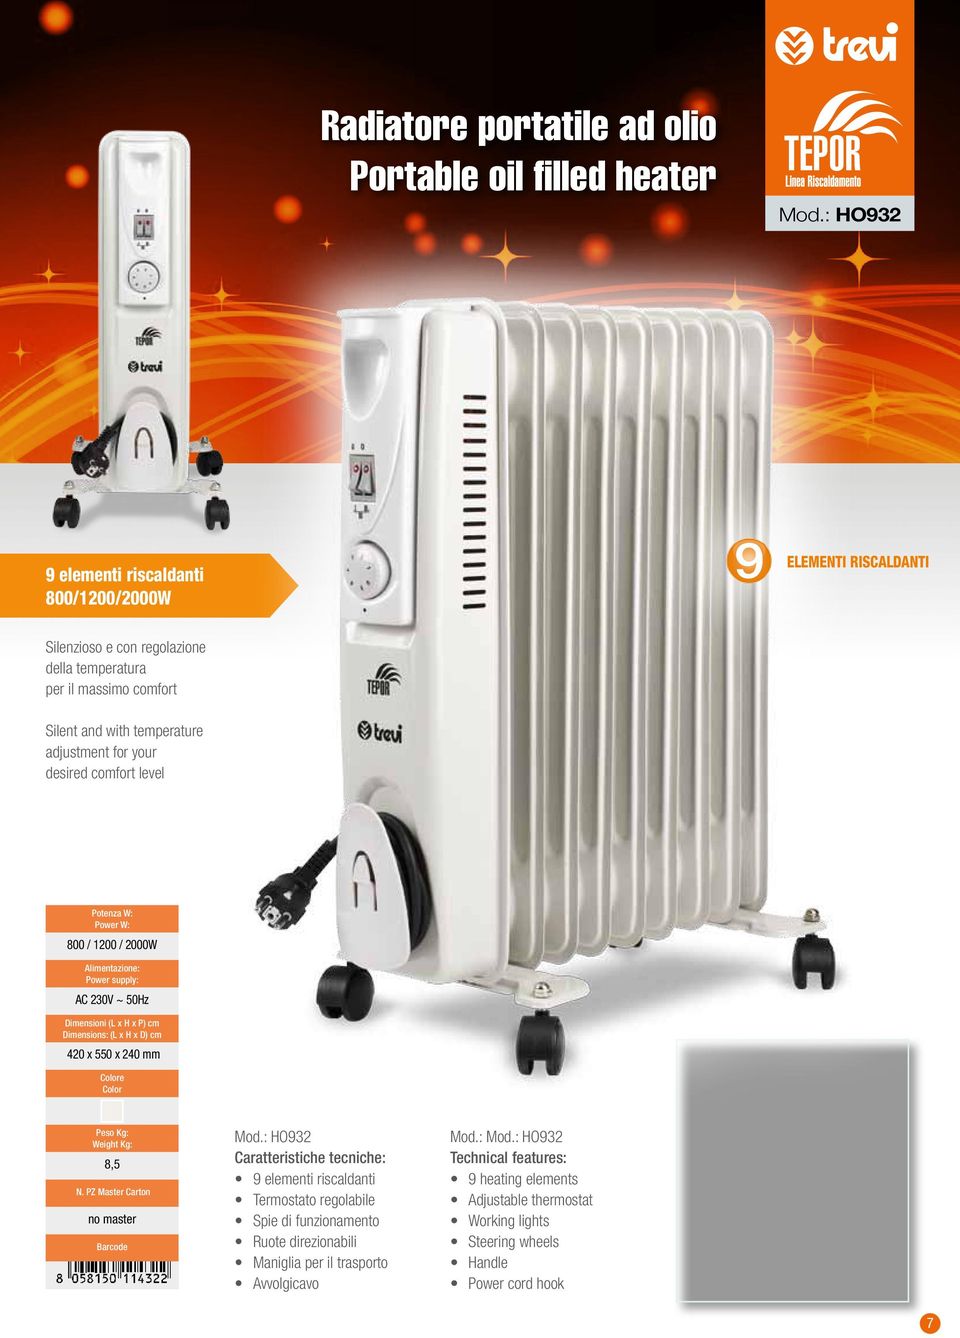 Silent and with temperature adjustment for your desired comfort level 800 / 1200 / 2000W 420 x 550 x 240 mm 8,5 no master Mod.